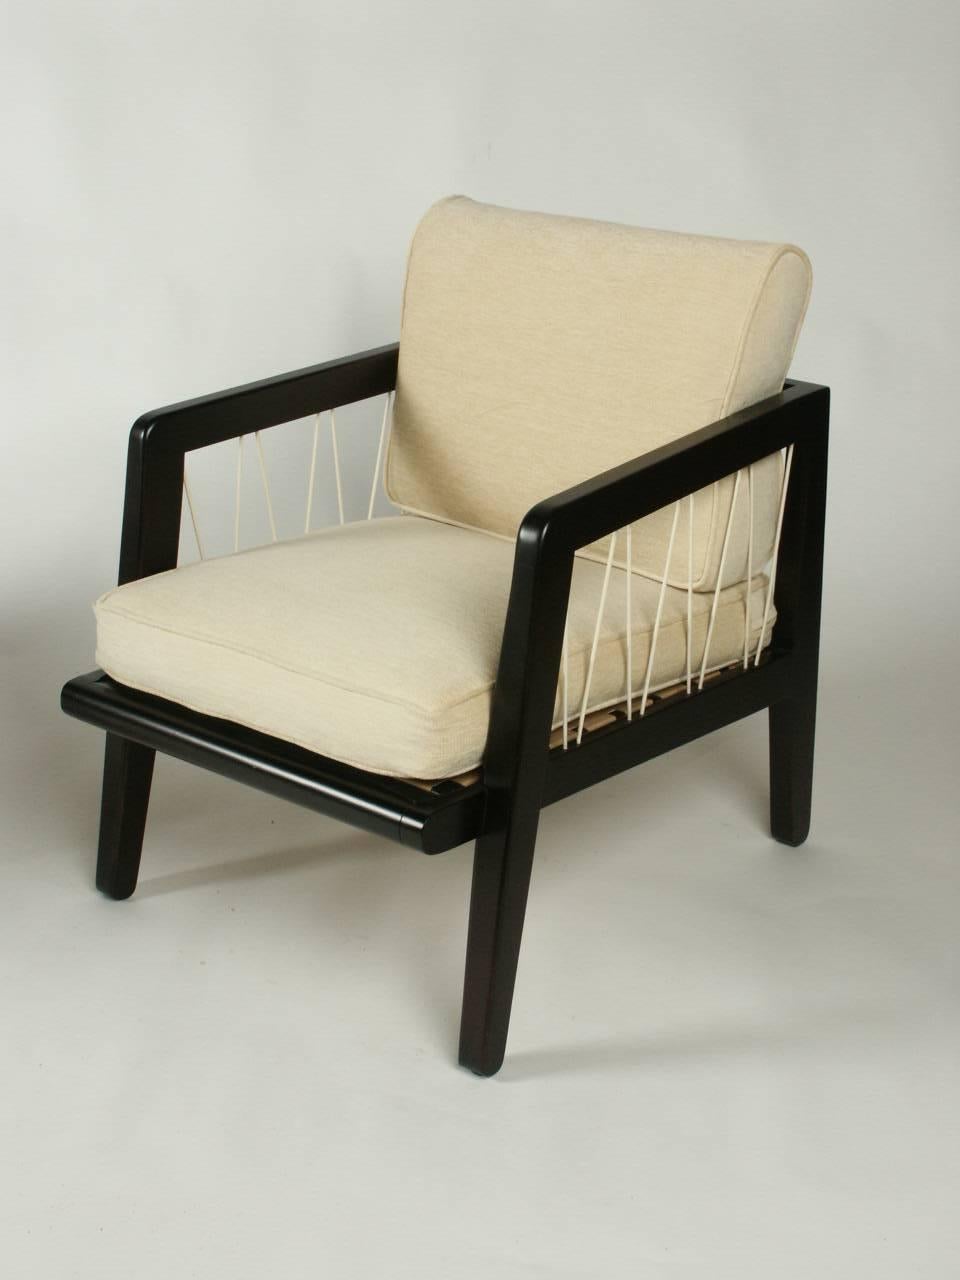 Pair of Edward Wormley Precedent collection for Drexel lounge chairs, circa 1947, dark stain on silver elm with woven nylon cording that zig zags between frame arm and seat. COM as this set shown is sold. This line was designed while designing for